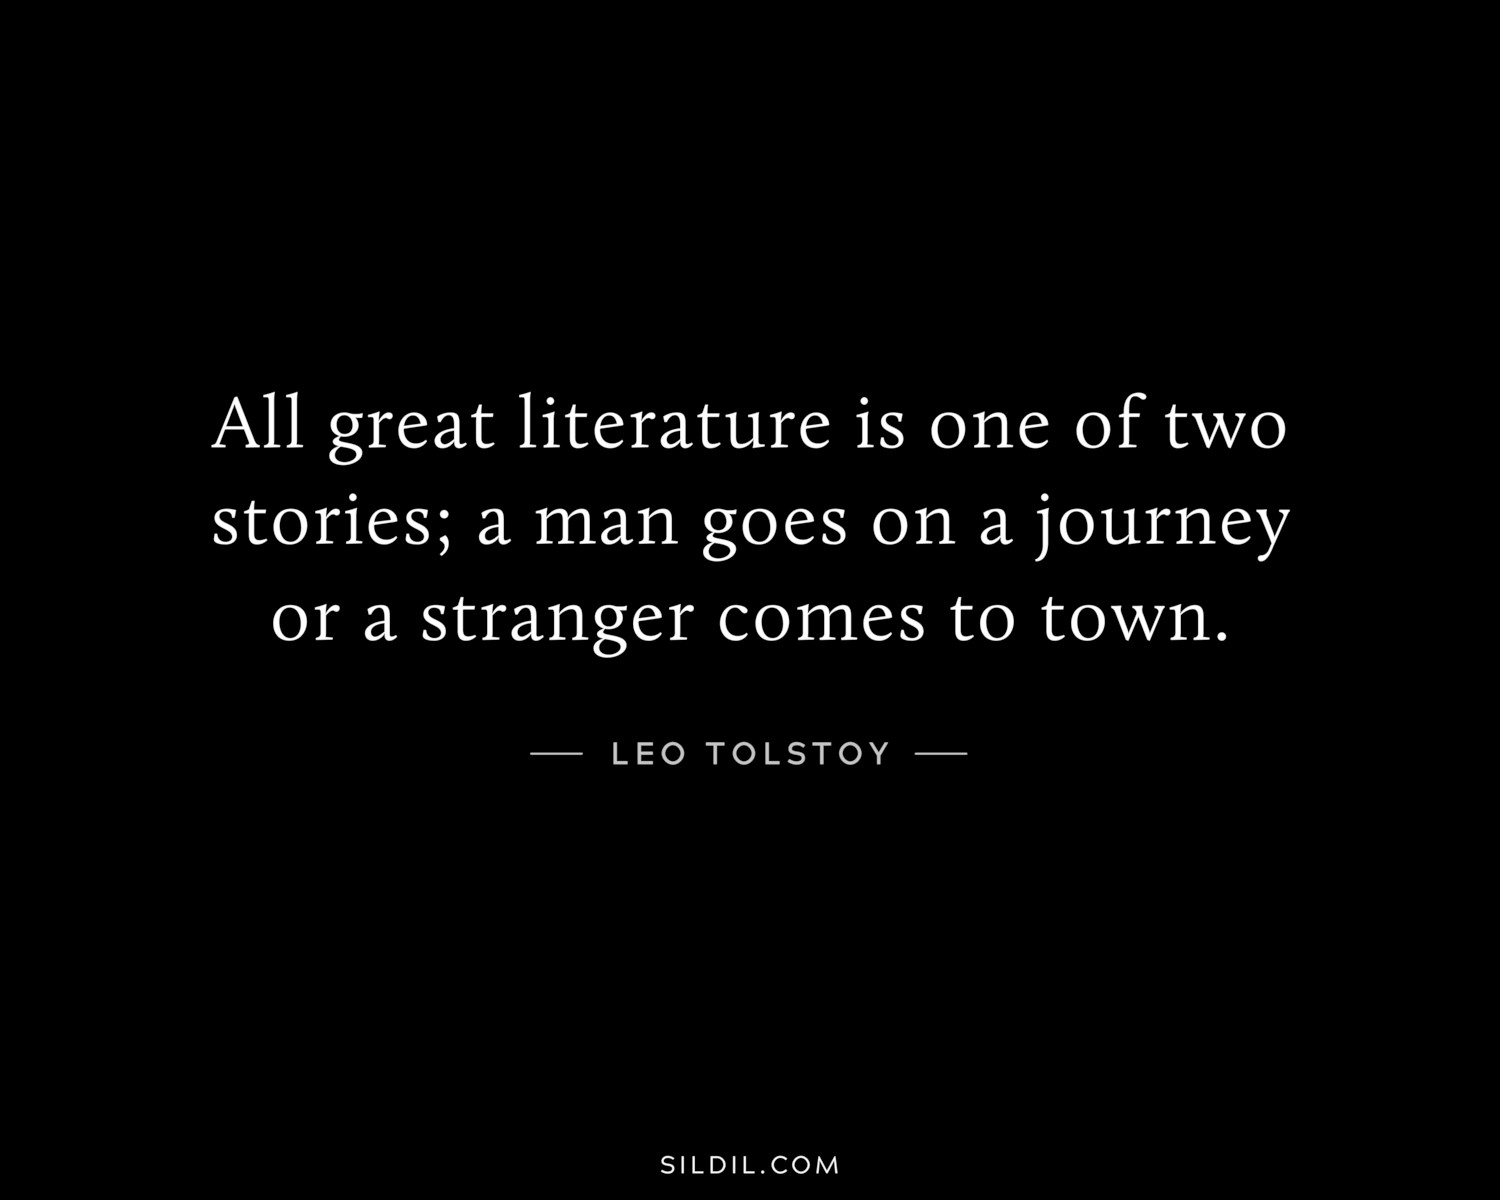 All great literature is one of two stories; a man goes on a journey or a stranger comes to town.